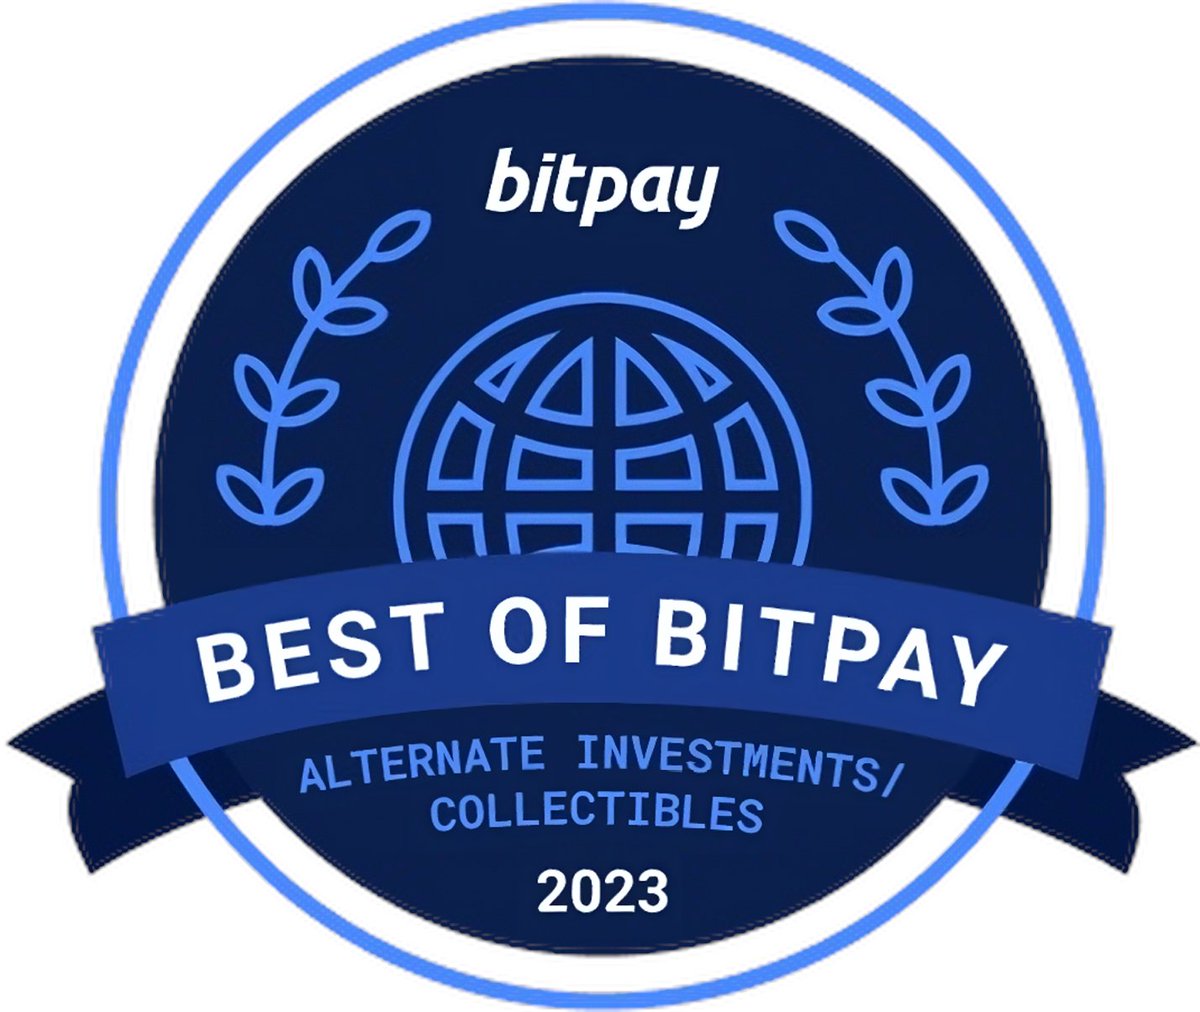 Best of BitPay 2023 - Alternative Investments/Collectibles @PWCCMarketplace is a leader in the trading card industry, offering a platform for buying and selling valued cards and collectibles. View all the winners by visiting: bitpay.com/blog/best-of-b… #BitPay #Bitcoin #crypto